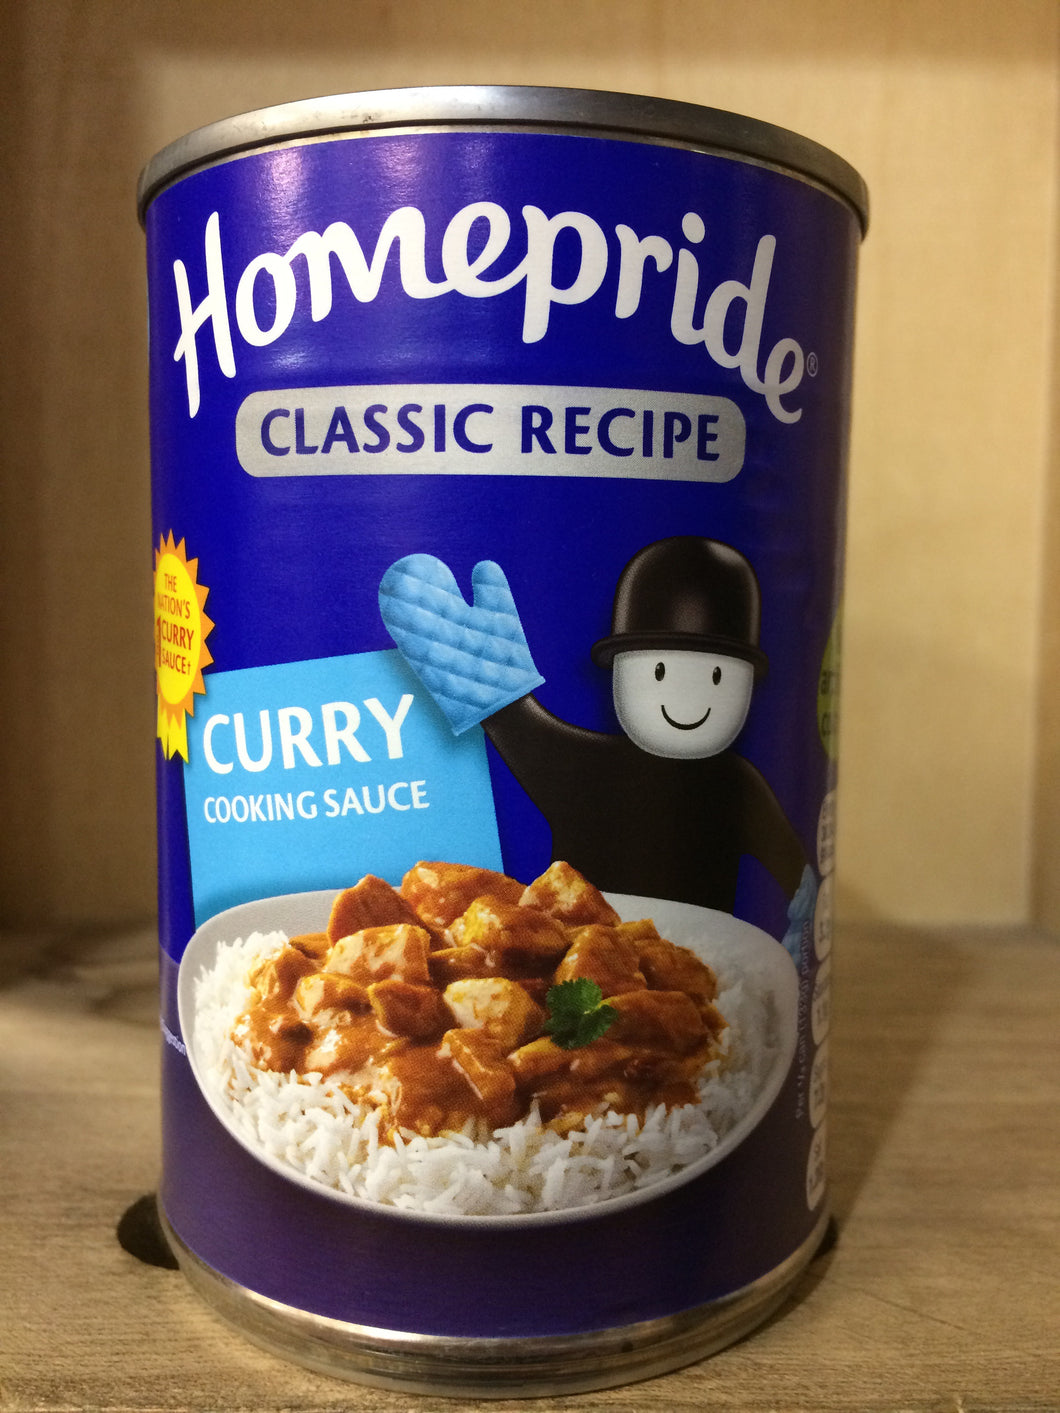 Homepride Curry Cooking Sauce 400g